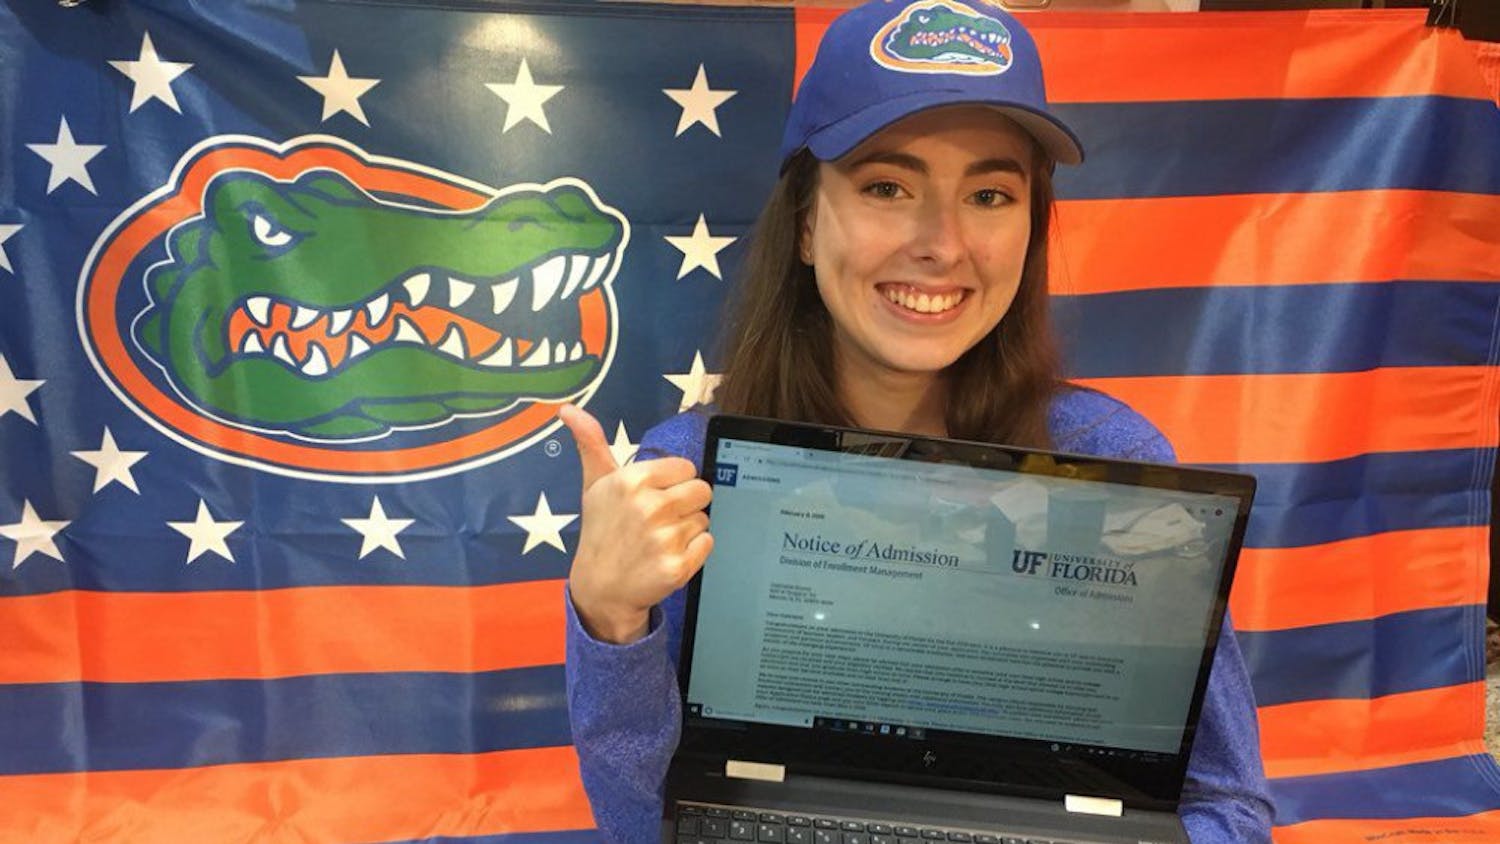 Gabrielle Russo, 17, was accepted into UF’s class of 2023. Russo, who’s a third generation Gator, applied as undecided but is interested in biomedical engineering.
&nbsp;